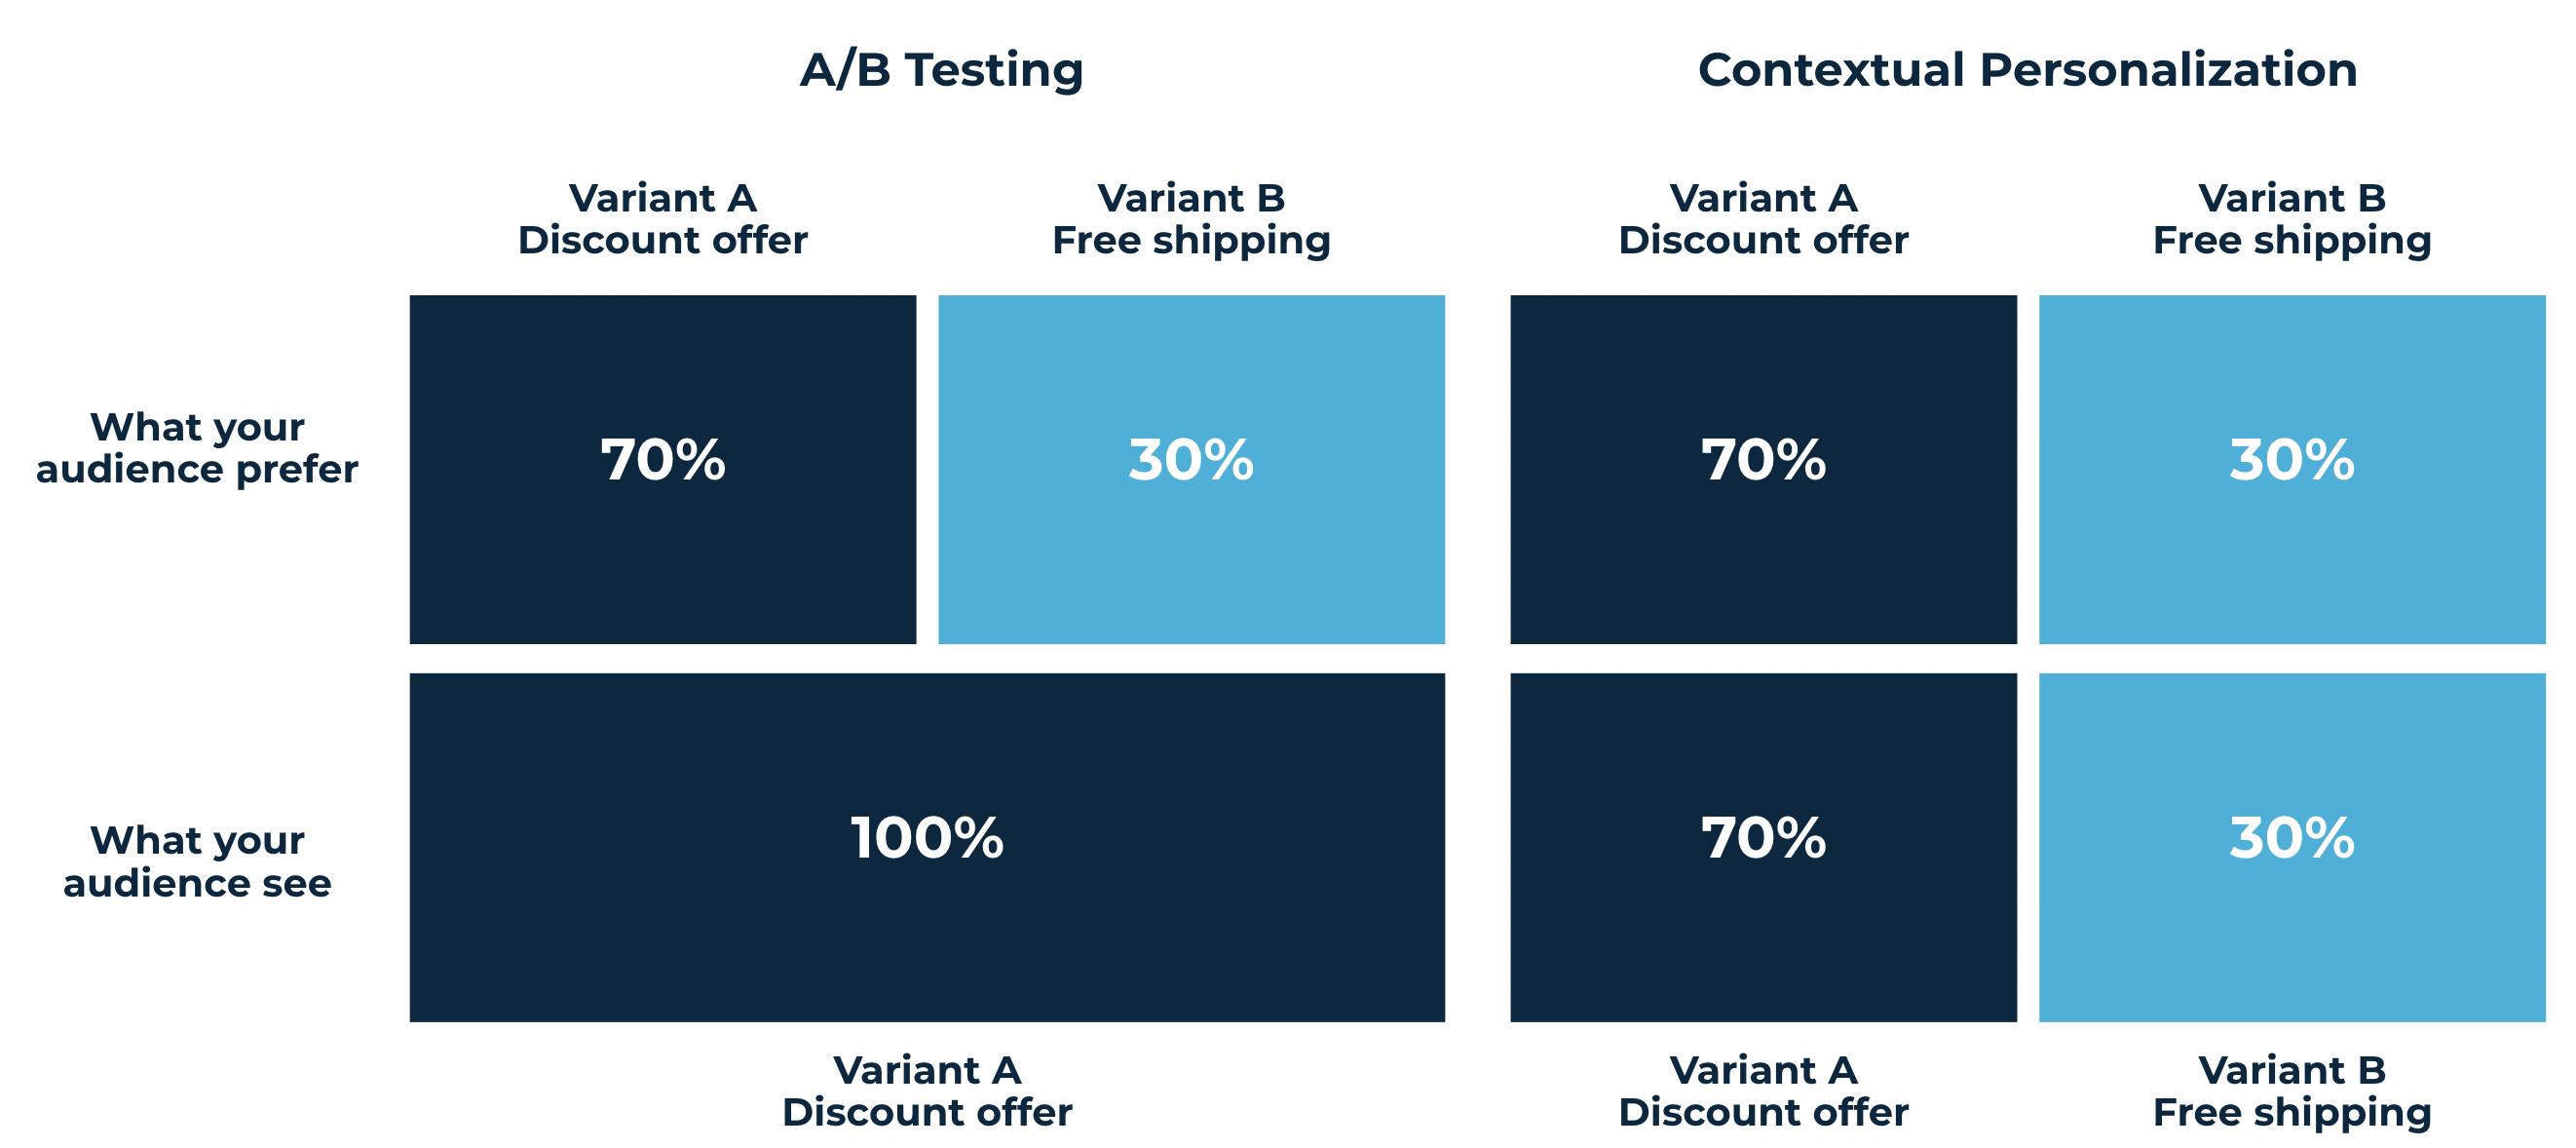 Instead of "Which variant is best for everyone?" ask, "Which variant is best for each customer?"